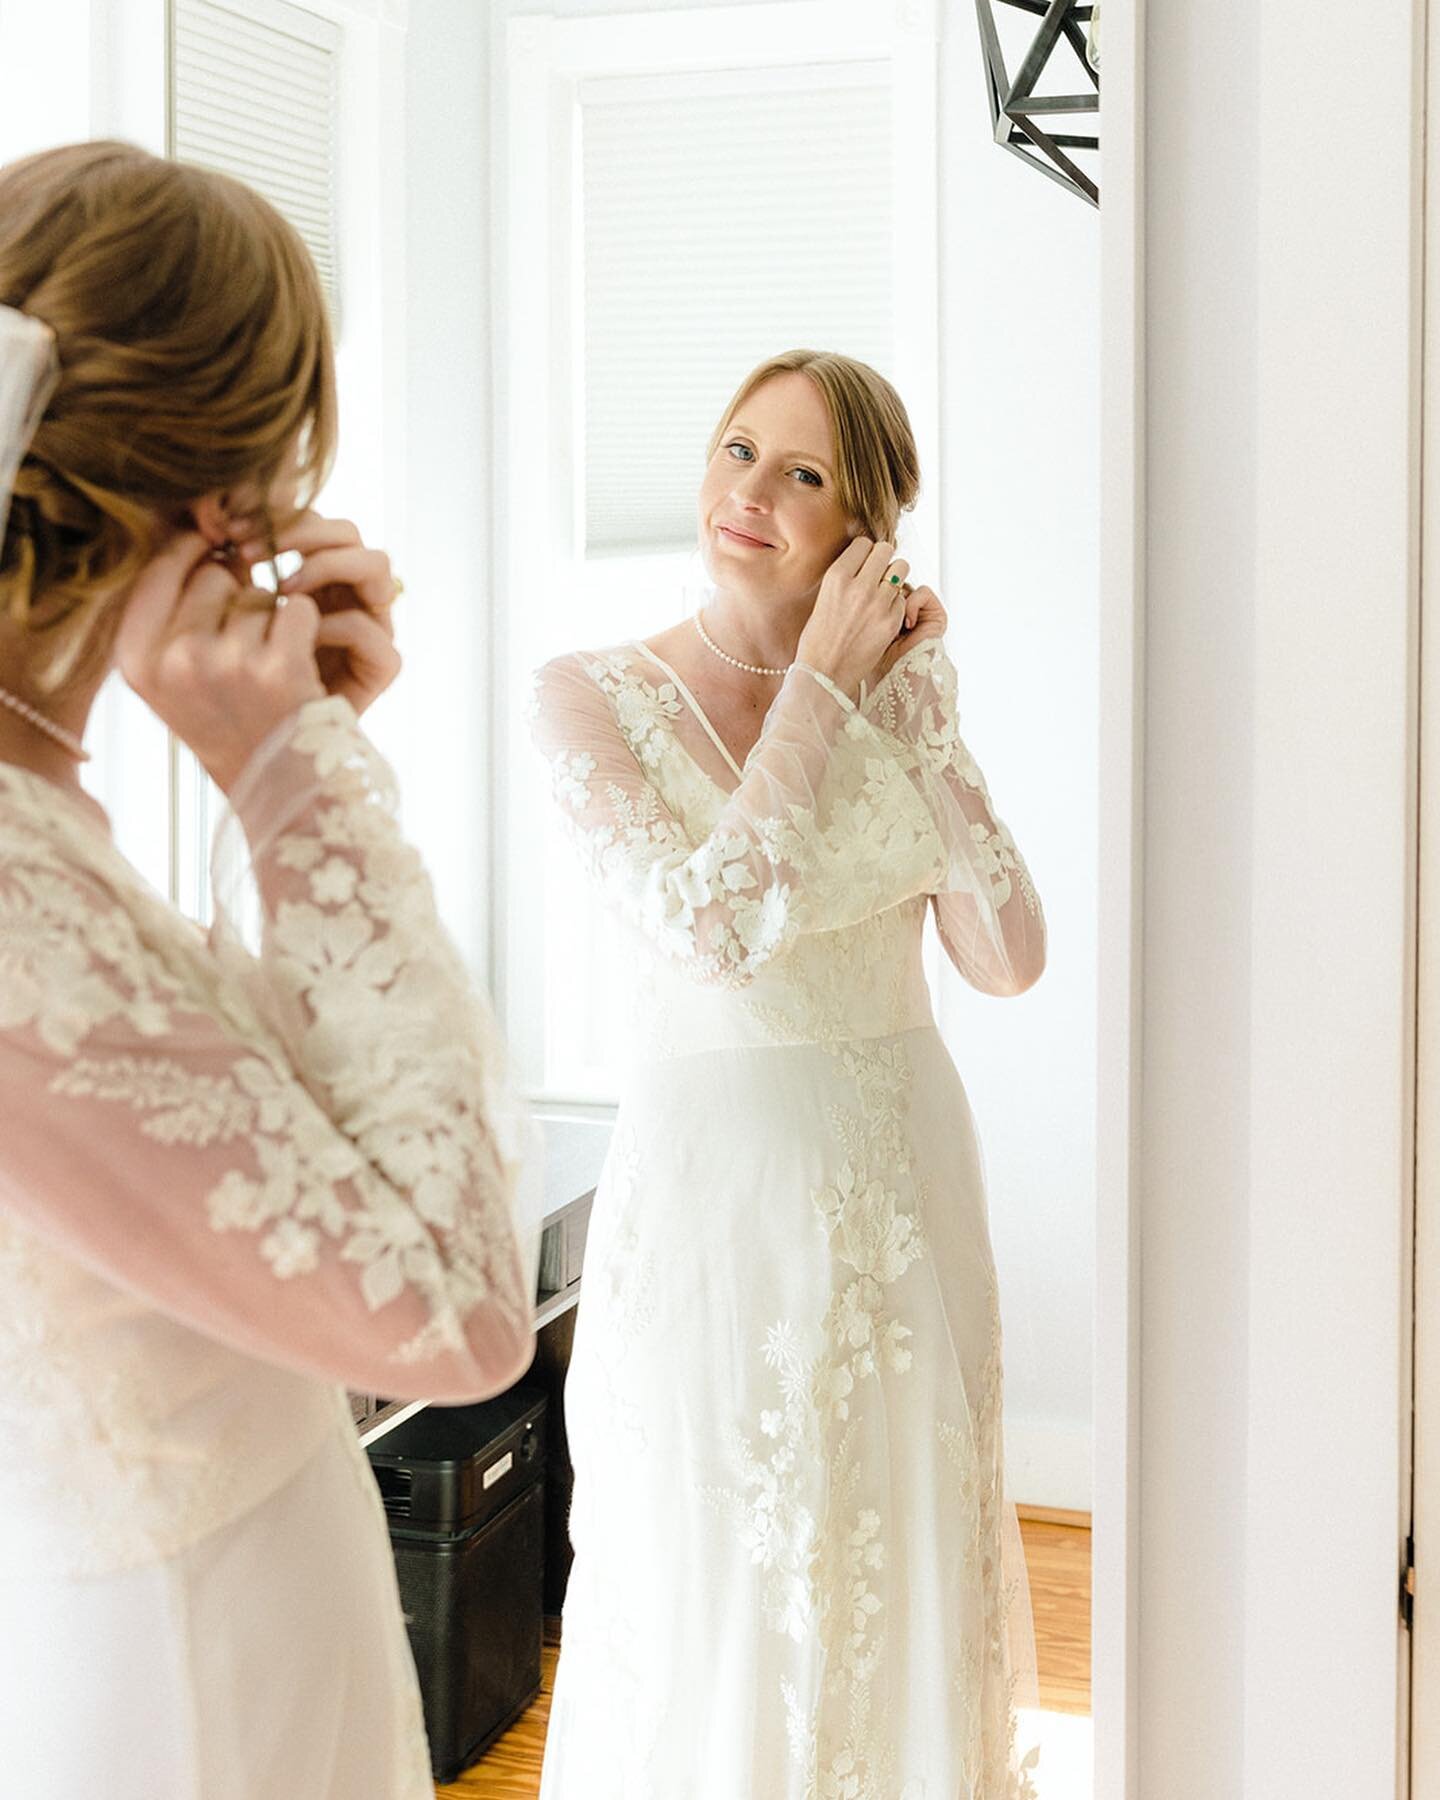 Are you wanting a soft, natural bridal makeup look? 𝗪𝗲 𝗵𝗮𝘃𝗲 𝘆𝗼𝘂 𝗰𝗼𝘃𝗲𝗿𝗲𝗱! We believe you should look like yourself on your wedding day, just elevated ❤️ ⁣
⁣
We specialize in soft/natural and natural/glam looks to enhance your beautiful